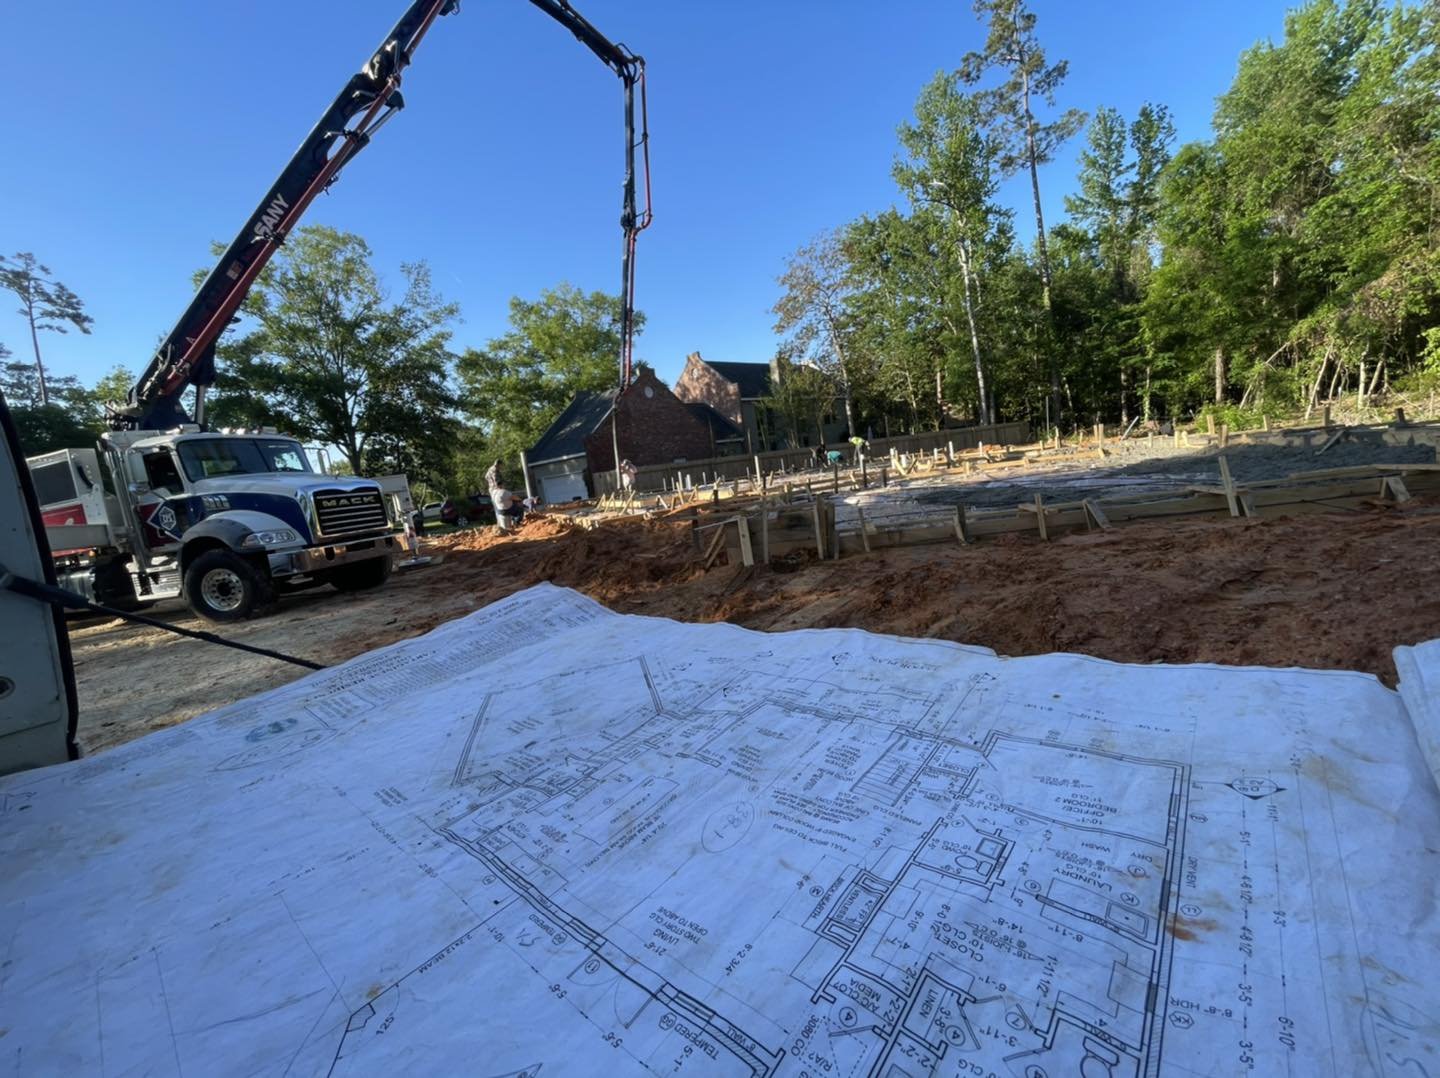 Busy morning for Eagle Eye in Mandeville, 150 yards doing down for our latest project! 🏠

#eagleeyehomes #MandevilleMagic #luxuryhomes #luxurylifestyle #northshorela